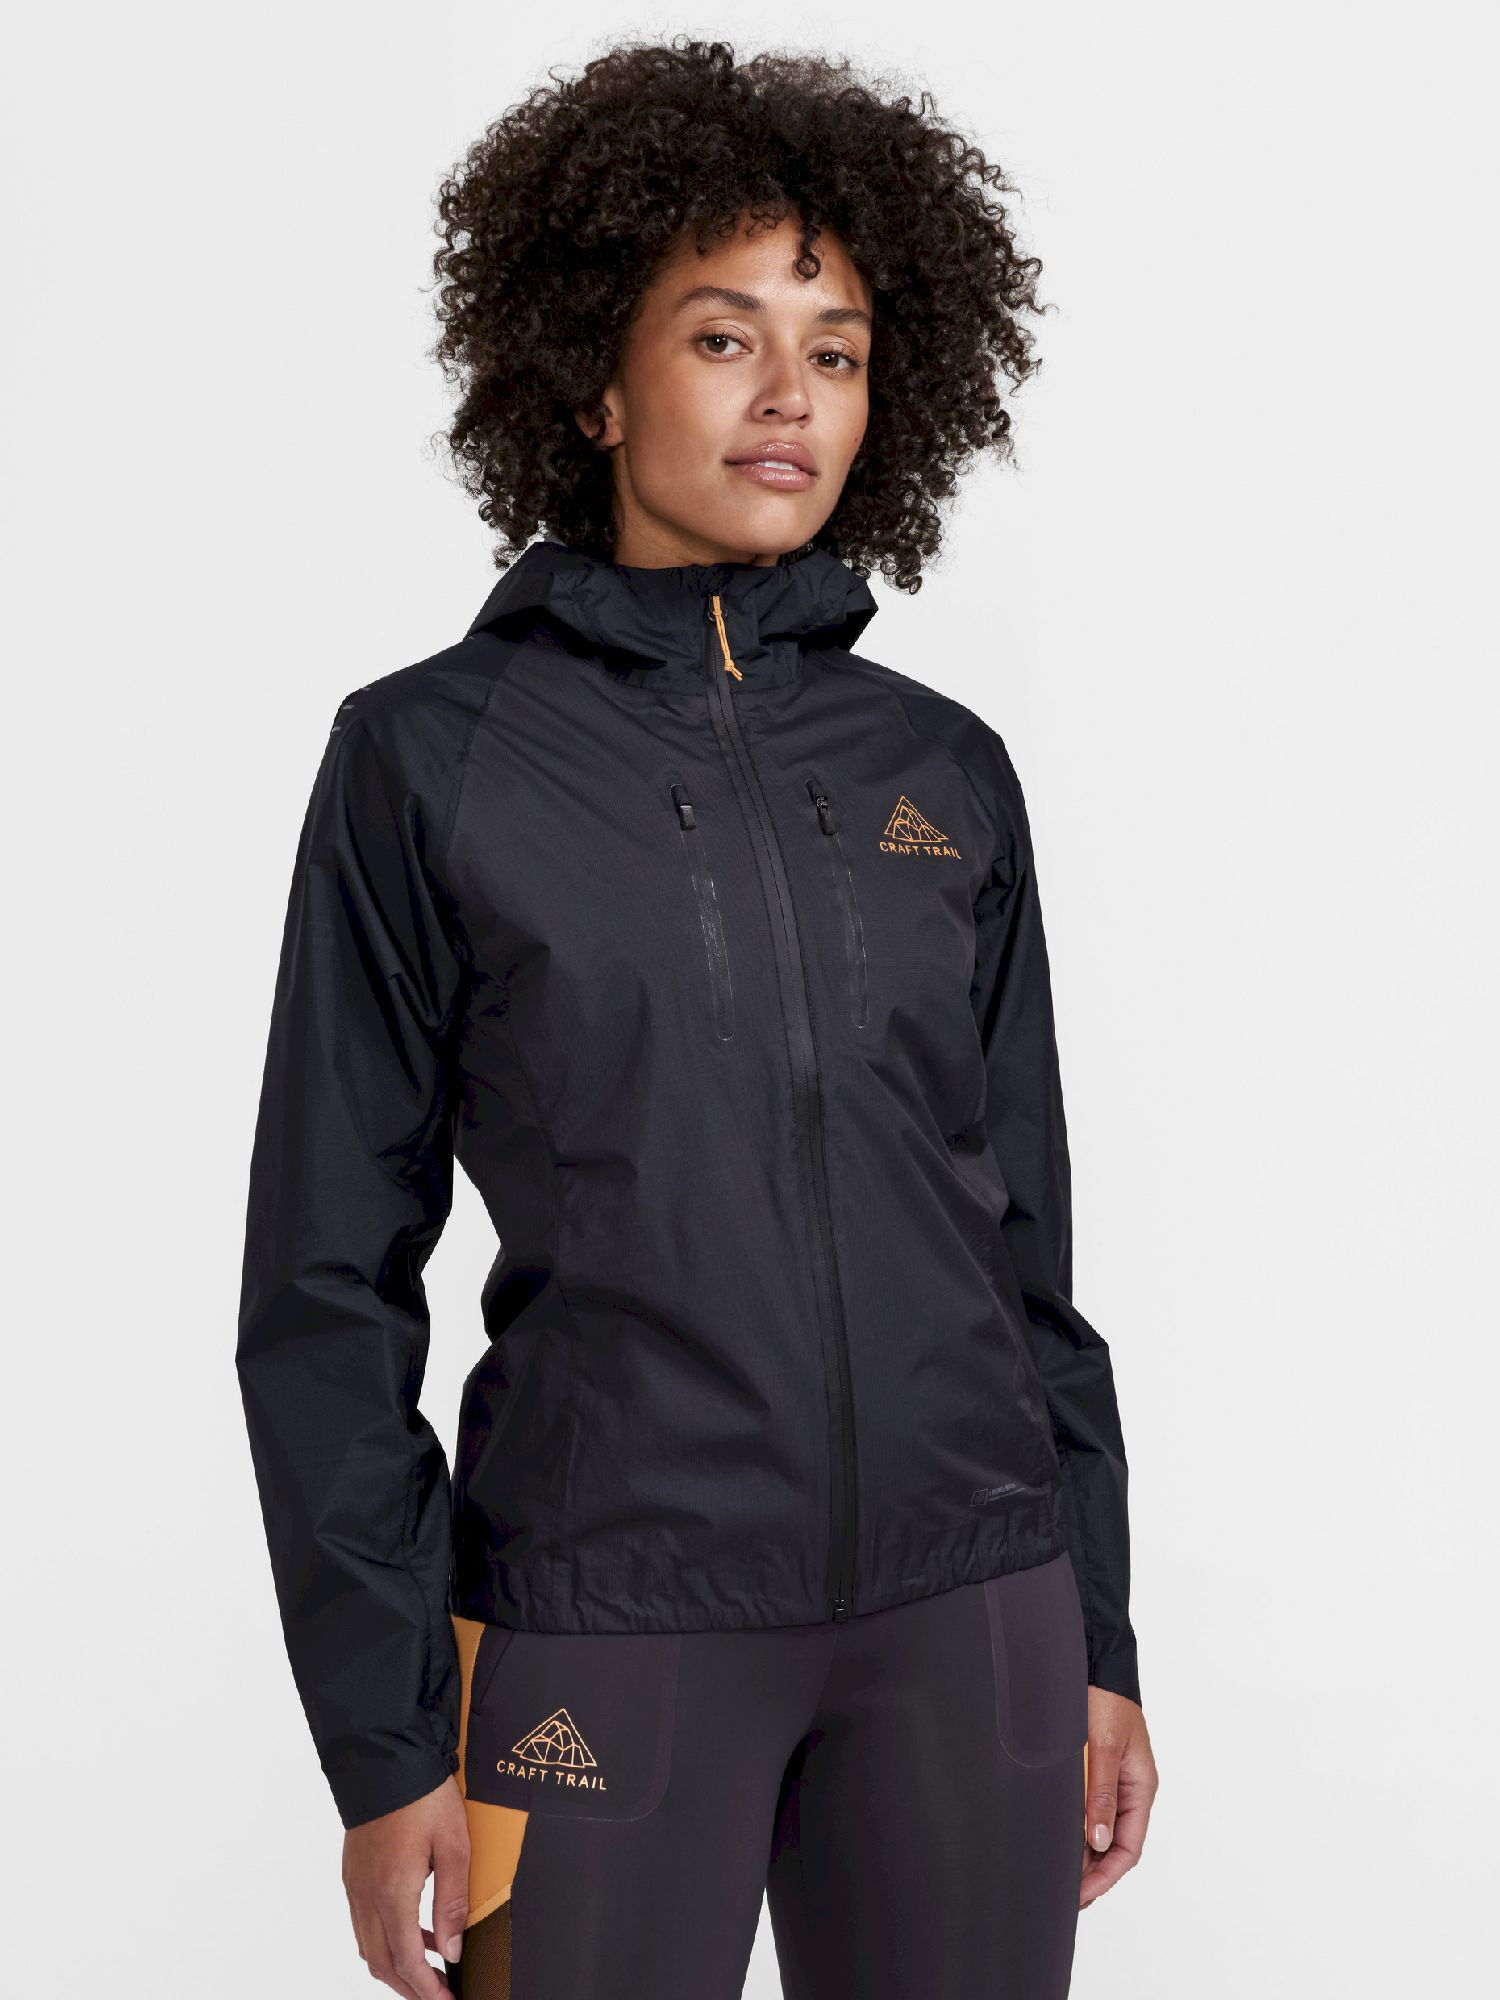 Craft Pro Trail 2L Light Weight Jacket - Chaqueta impermeable - Mujer | Hardloop